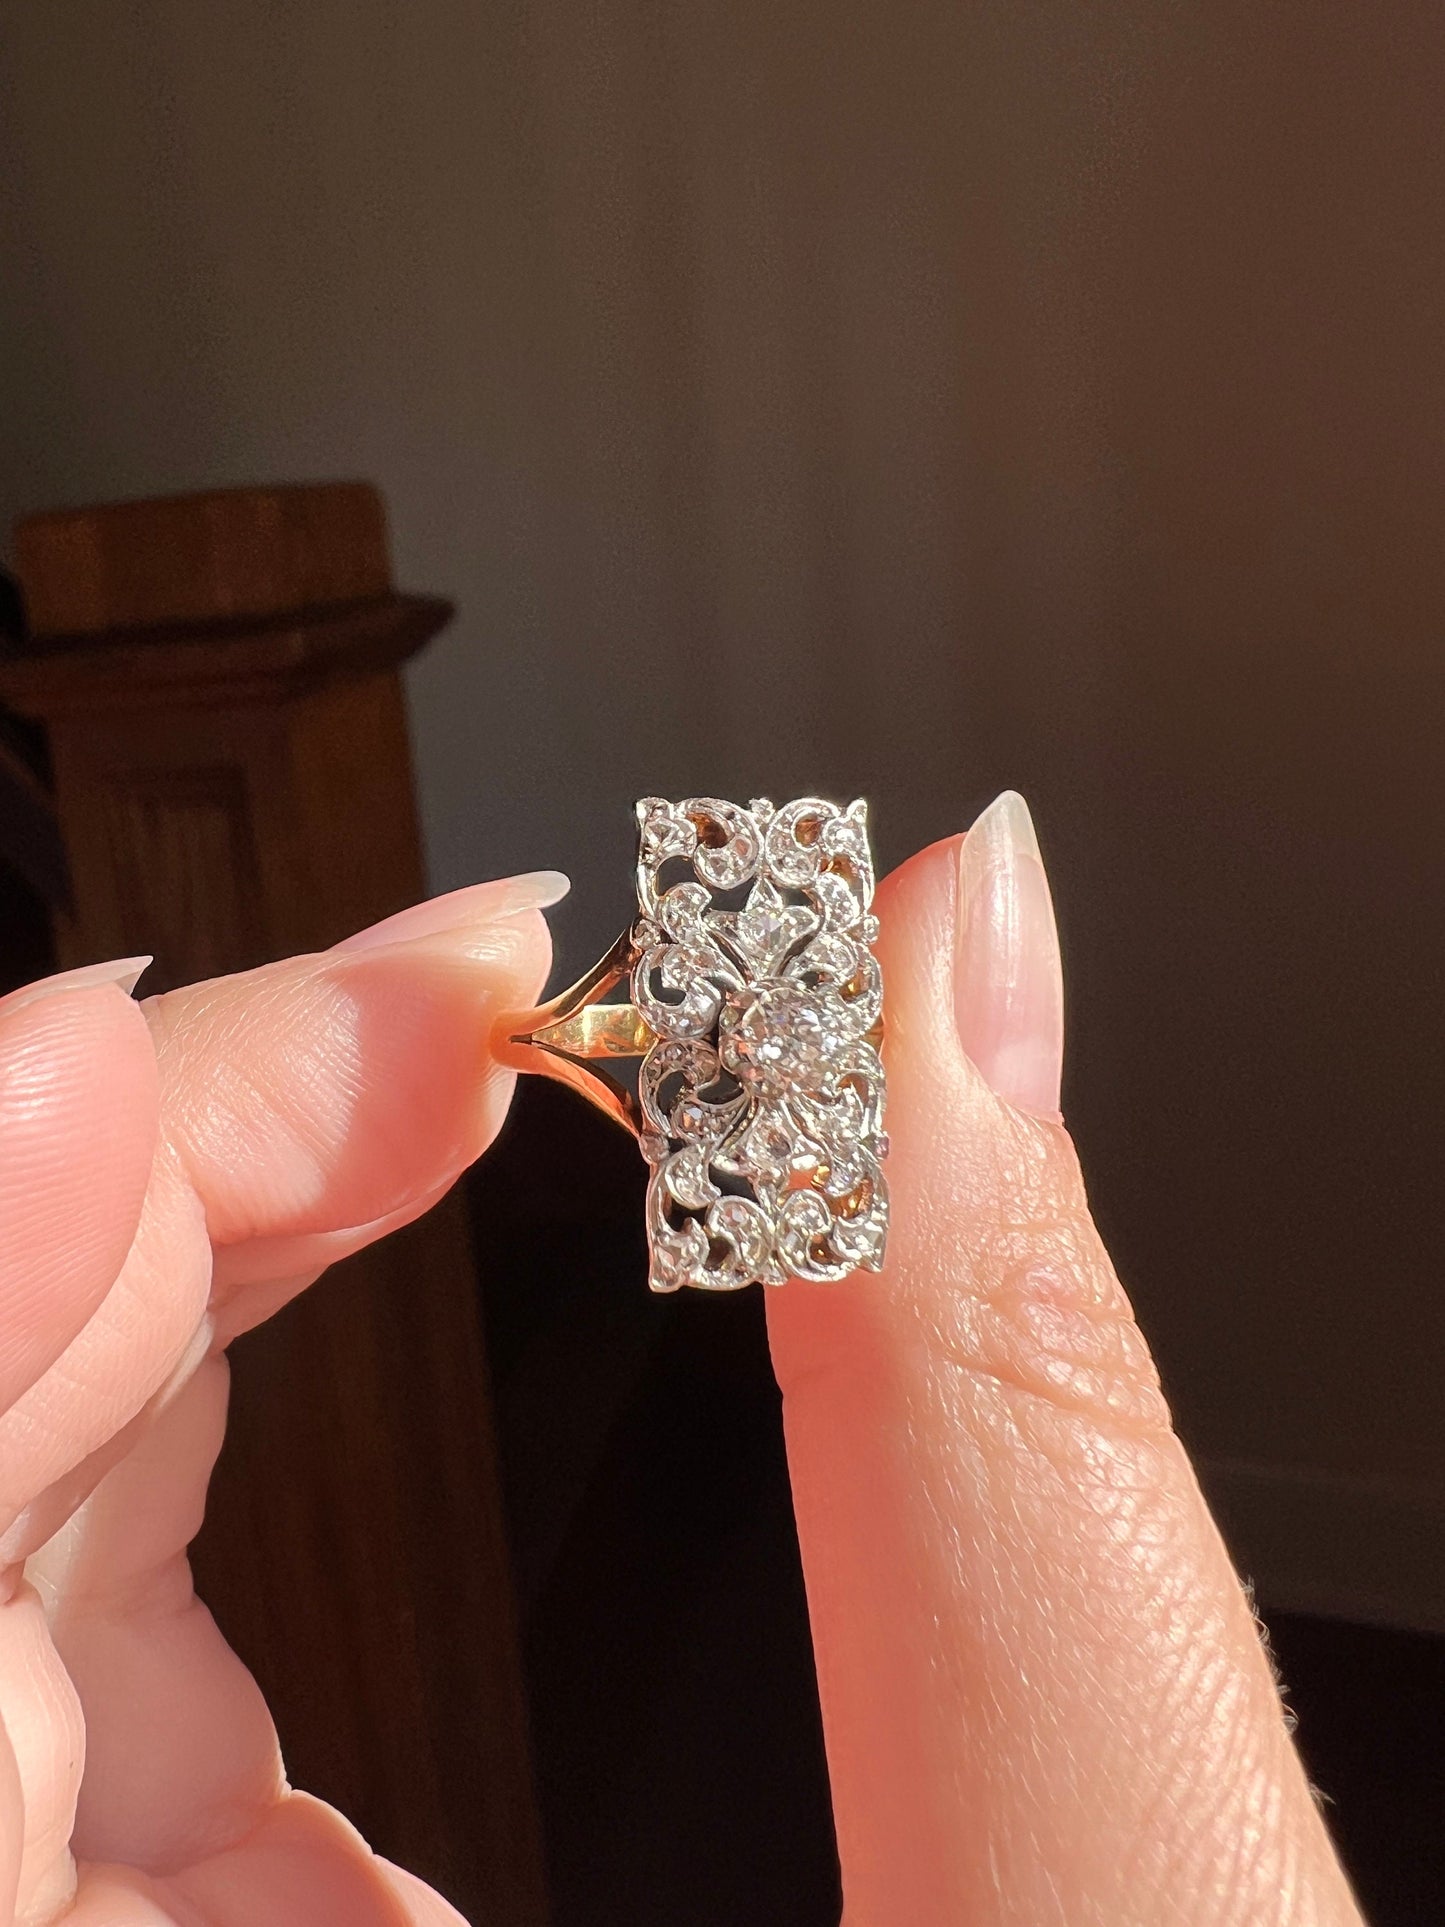 Very ORNATE Lace Filigree Rose Old Mine Cut DIAMOND Ring 18k Gold French Antique Belle Epoque Victorian Art Nouveau Gift Rectangle Panel